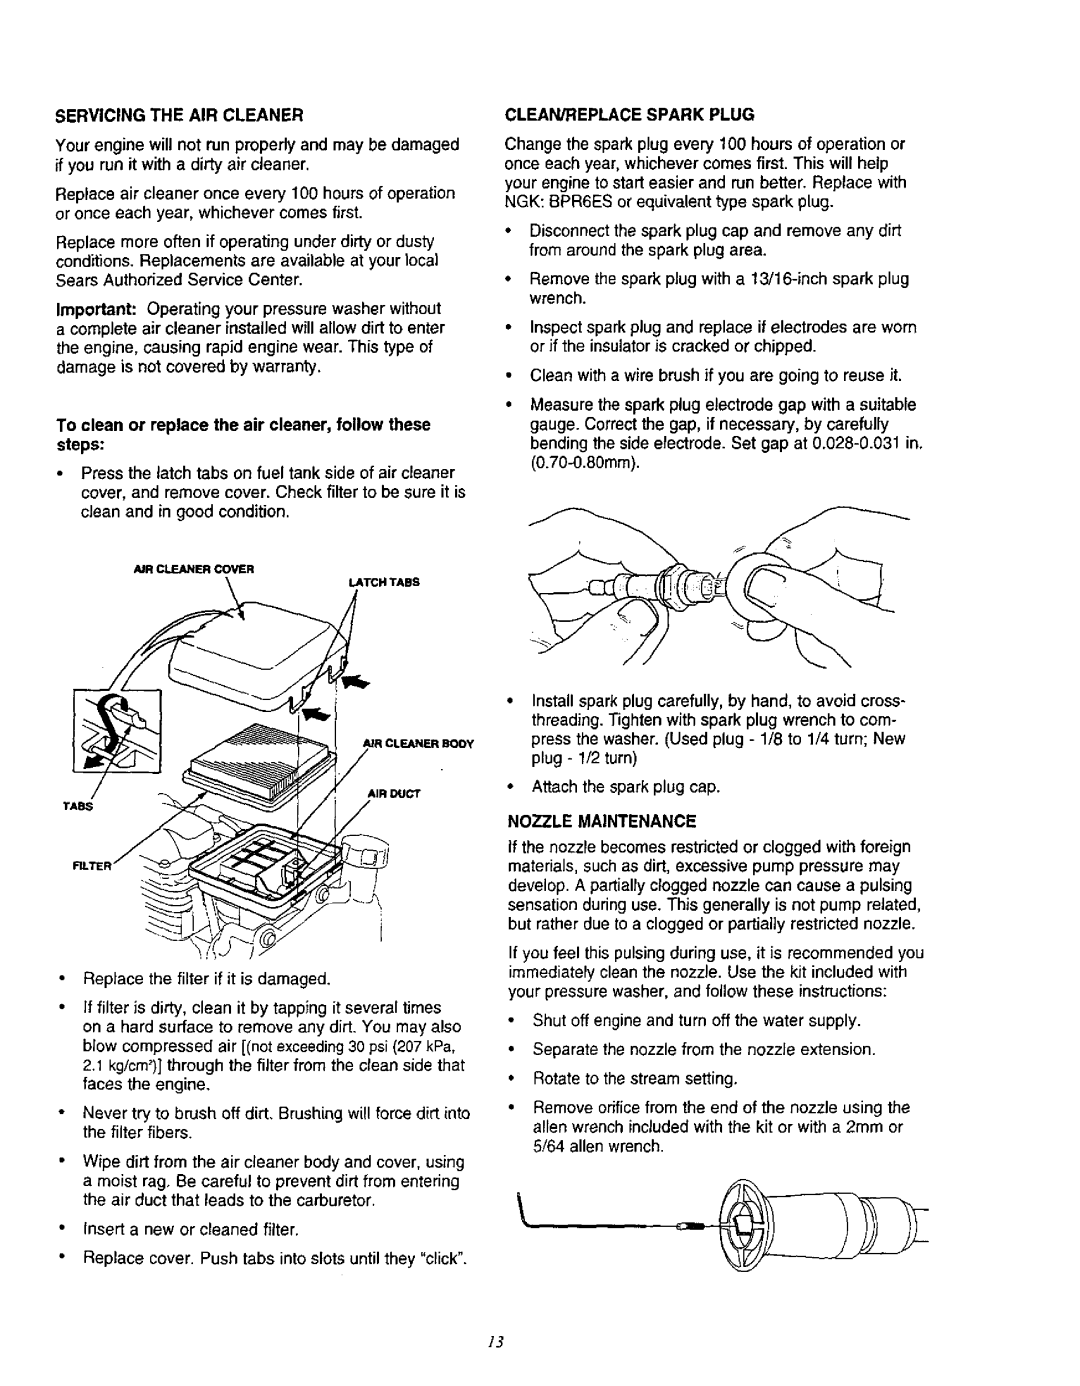 Craftsman 580.76201 owner manual Servicing The Air Cleaner, Clean/Replace Spark Plug, Nozzle Maintenance 